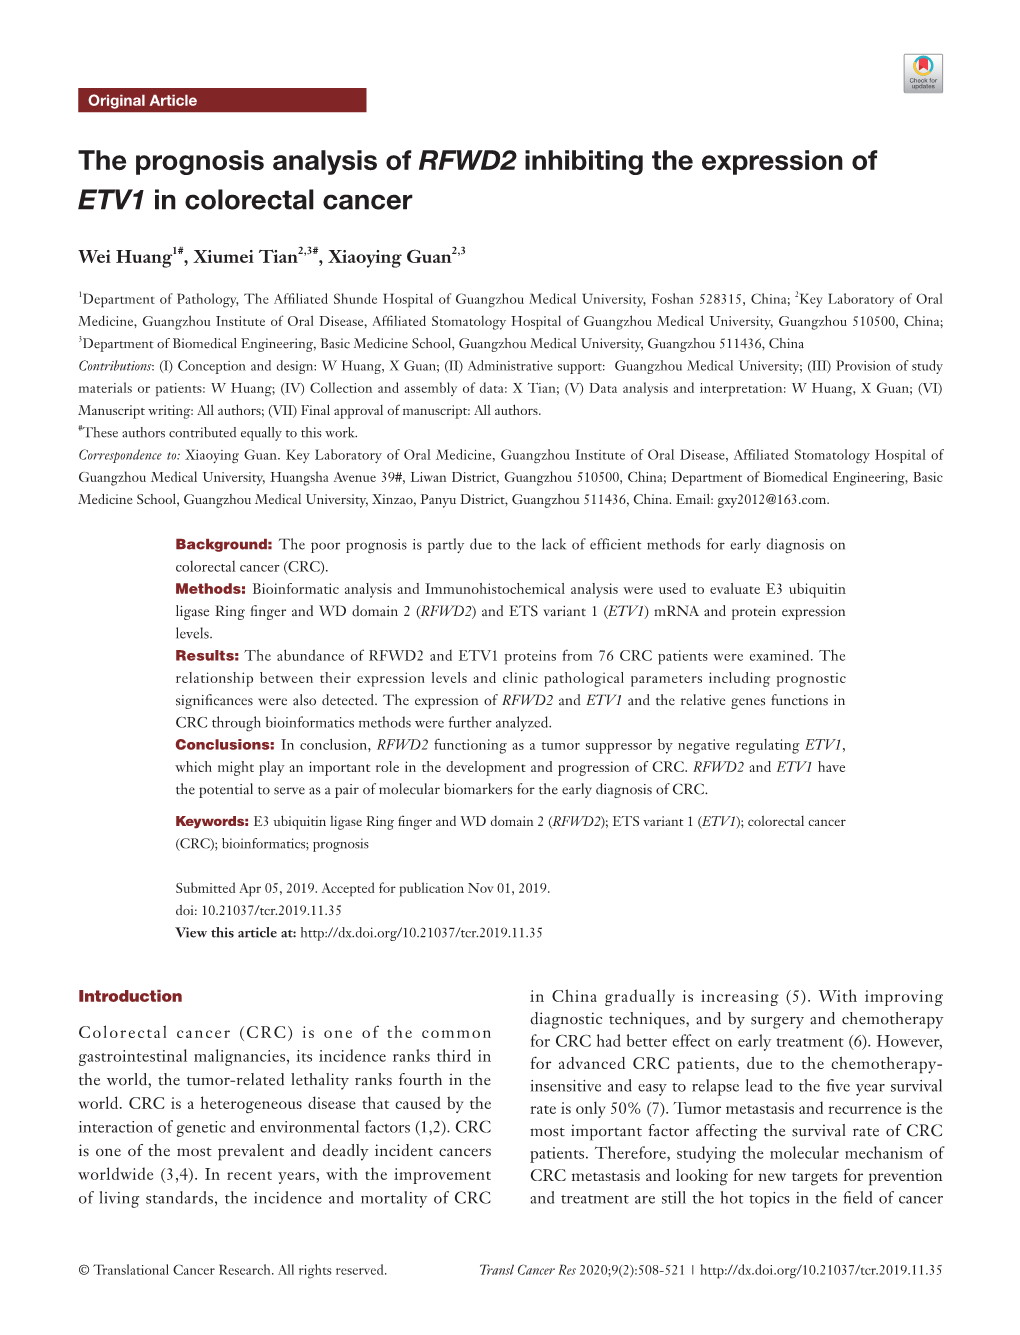 The Prognosis Analysis of RFWD2 Inhibiting the Expression of ETV1 in Colorectal Cancer